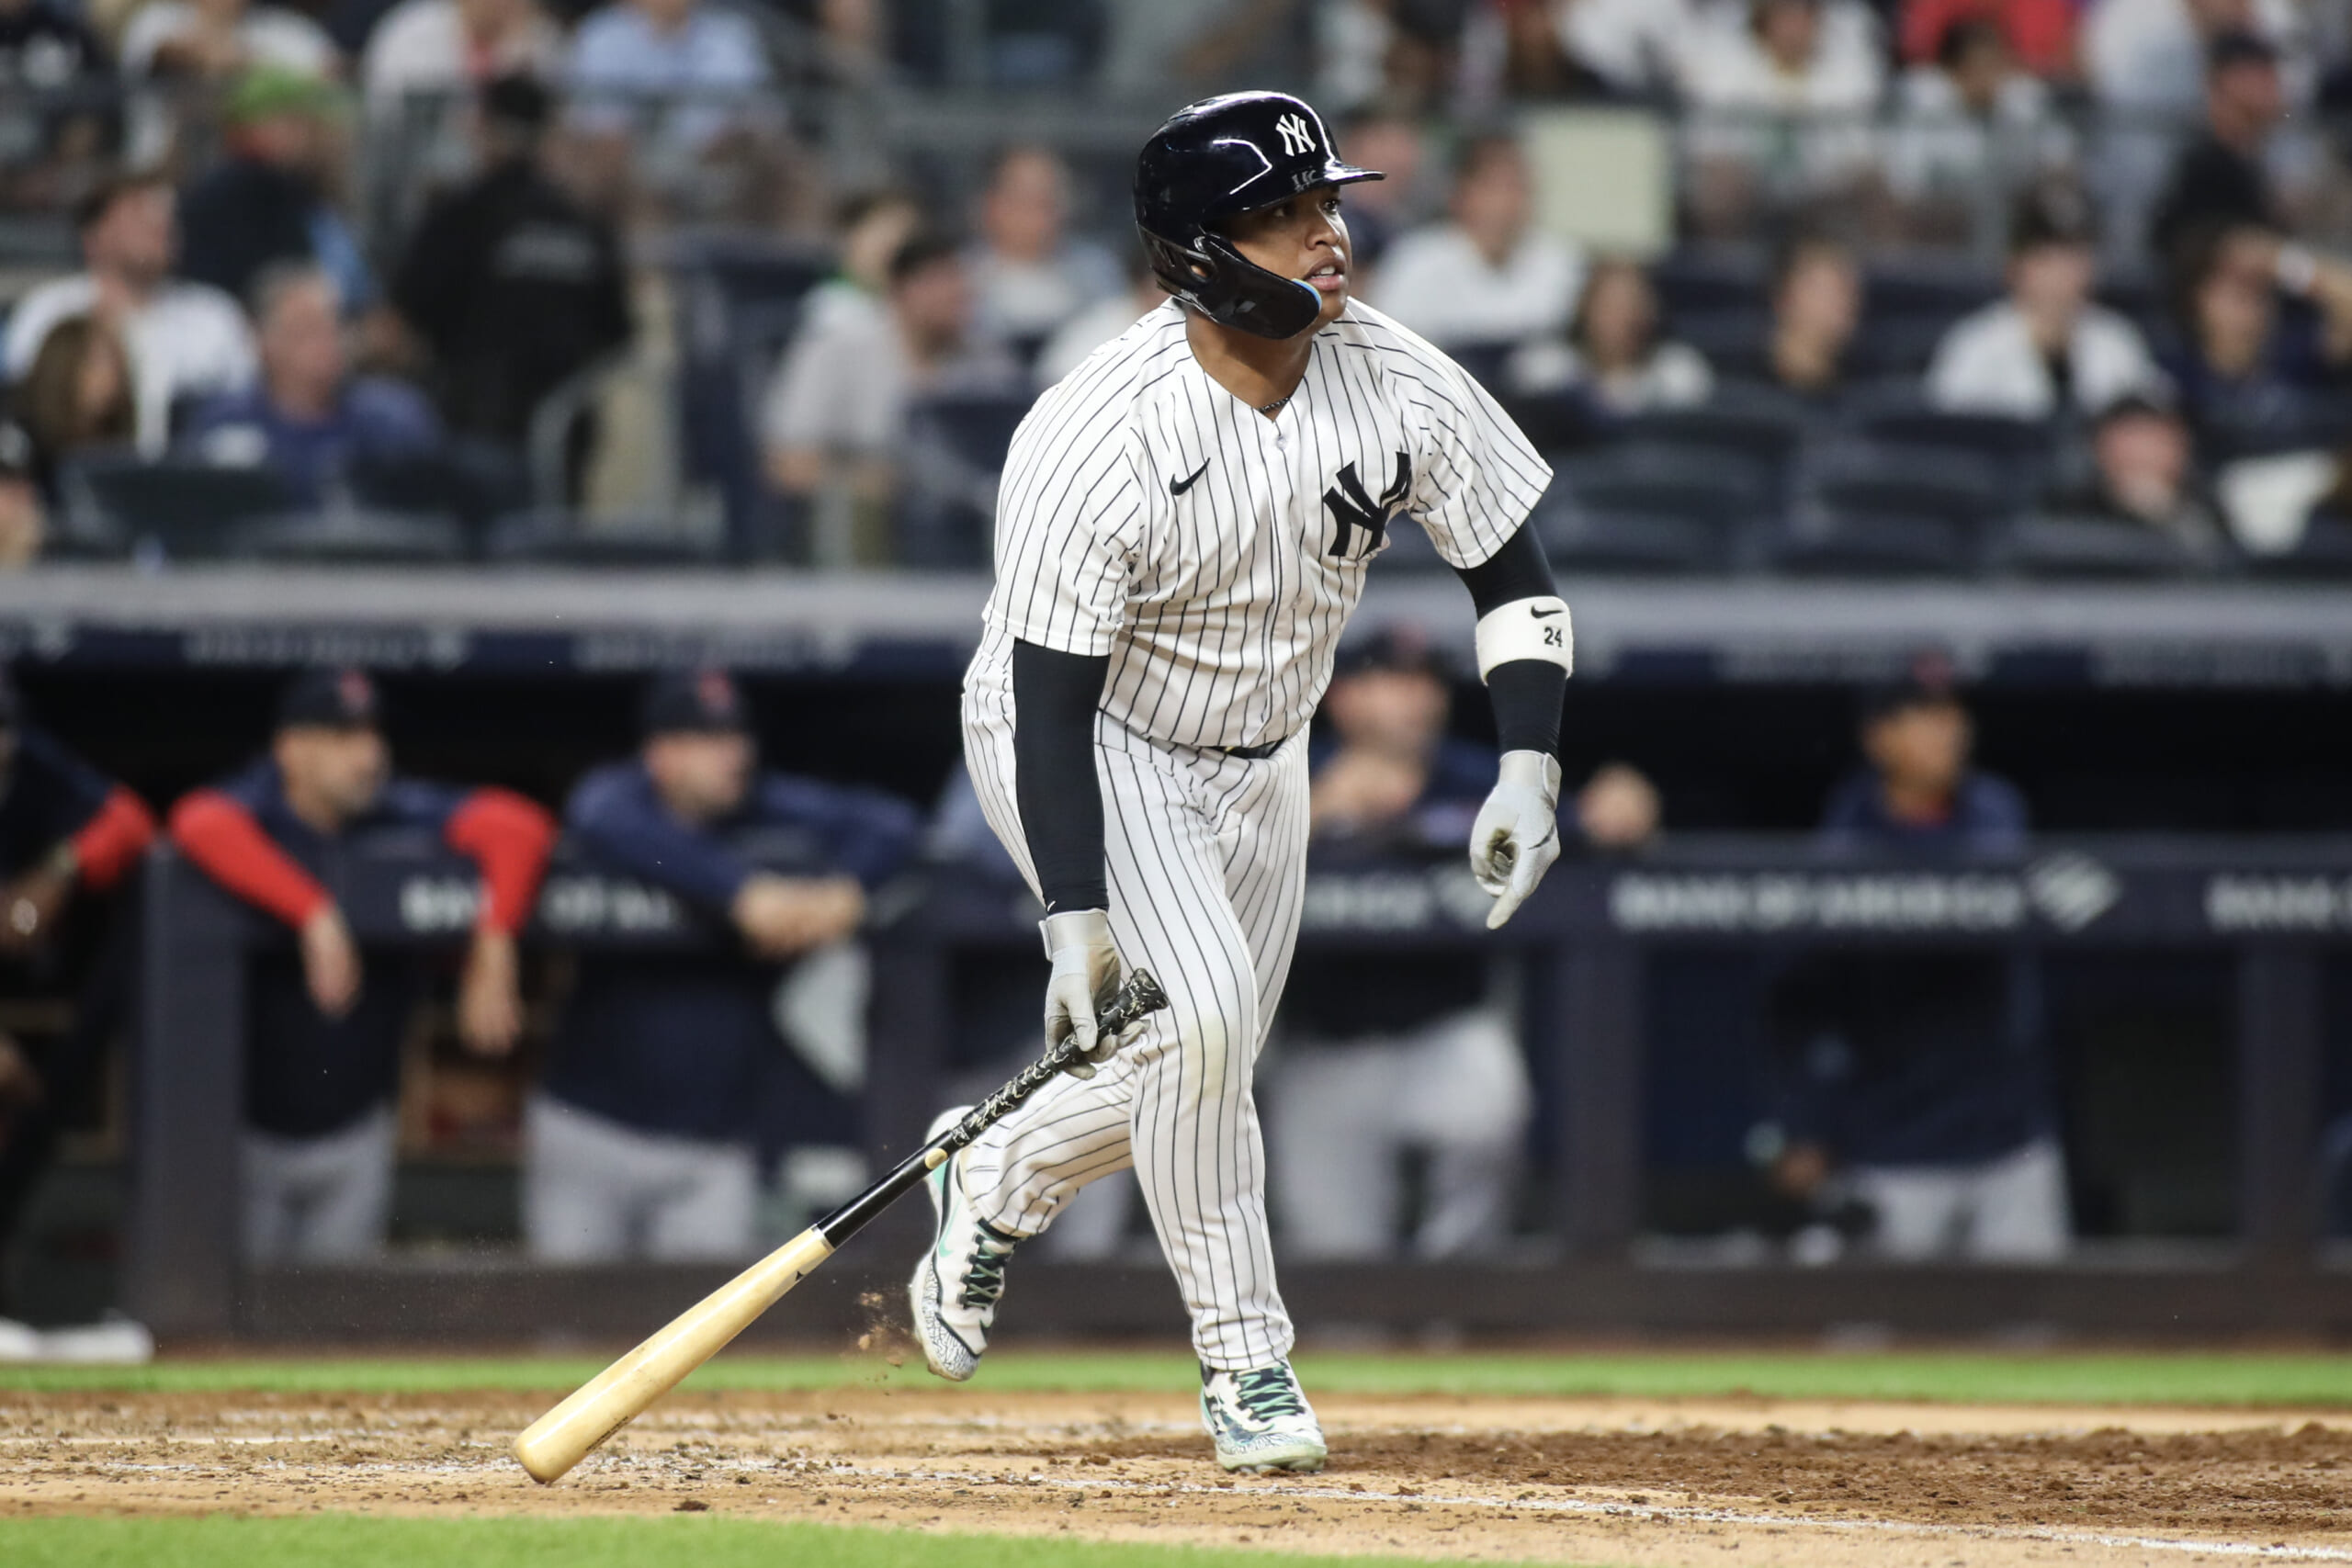 The Yankees can still grab red-hot outfielder in free agency